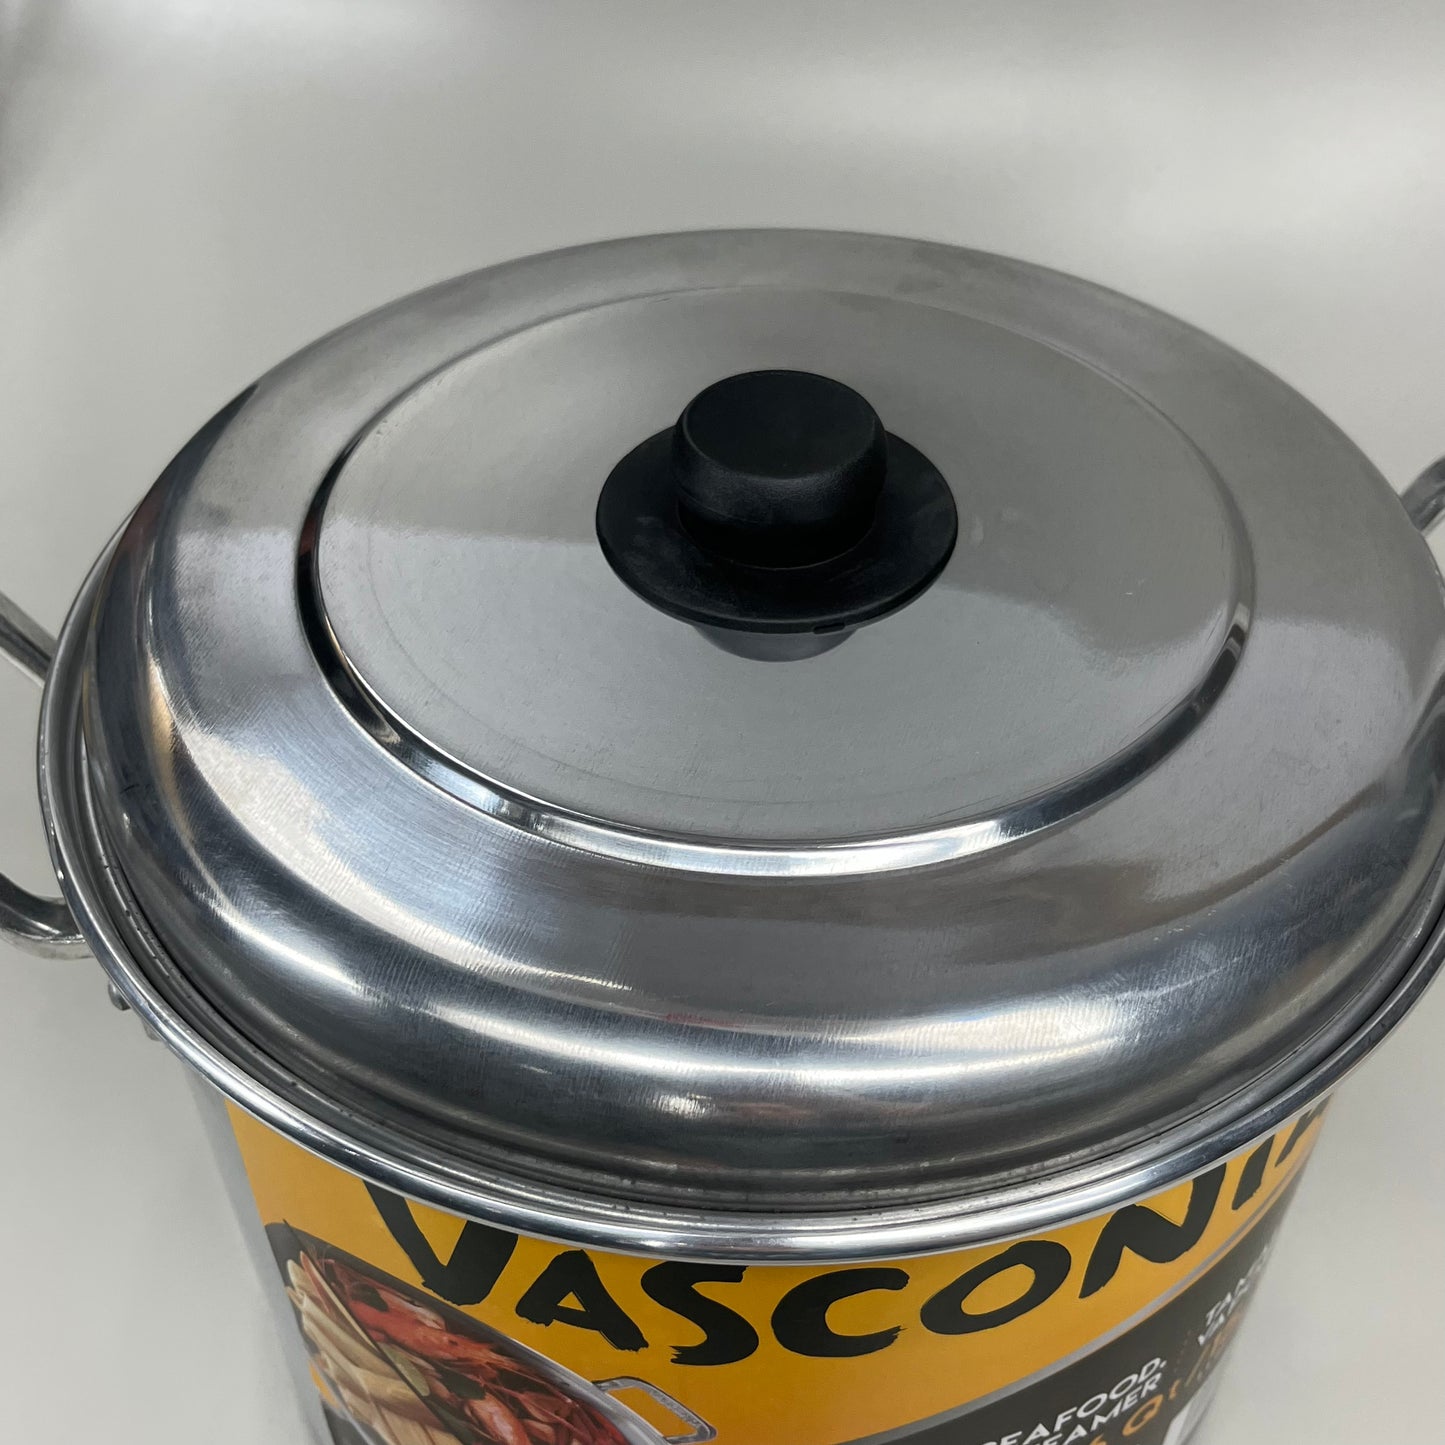 VASCONIA Steamerpot Lid and Tray Aluminum Stainless 16 qt Silver 713411 (New)